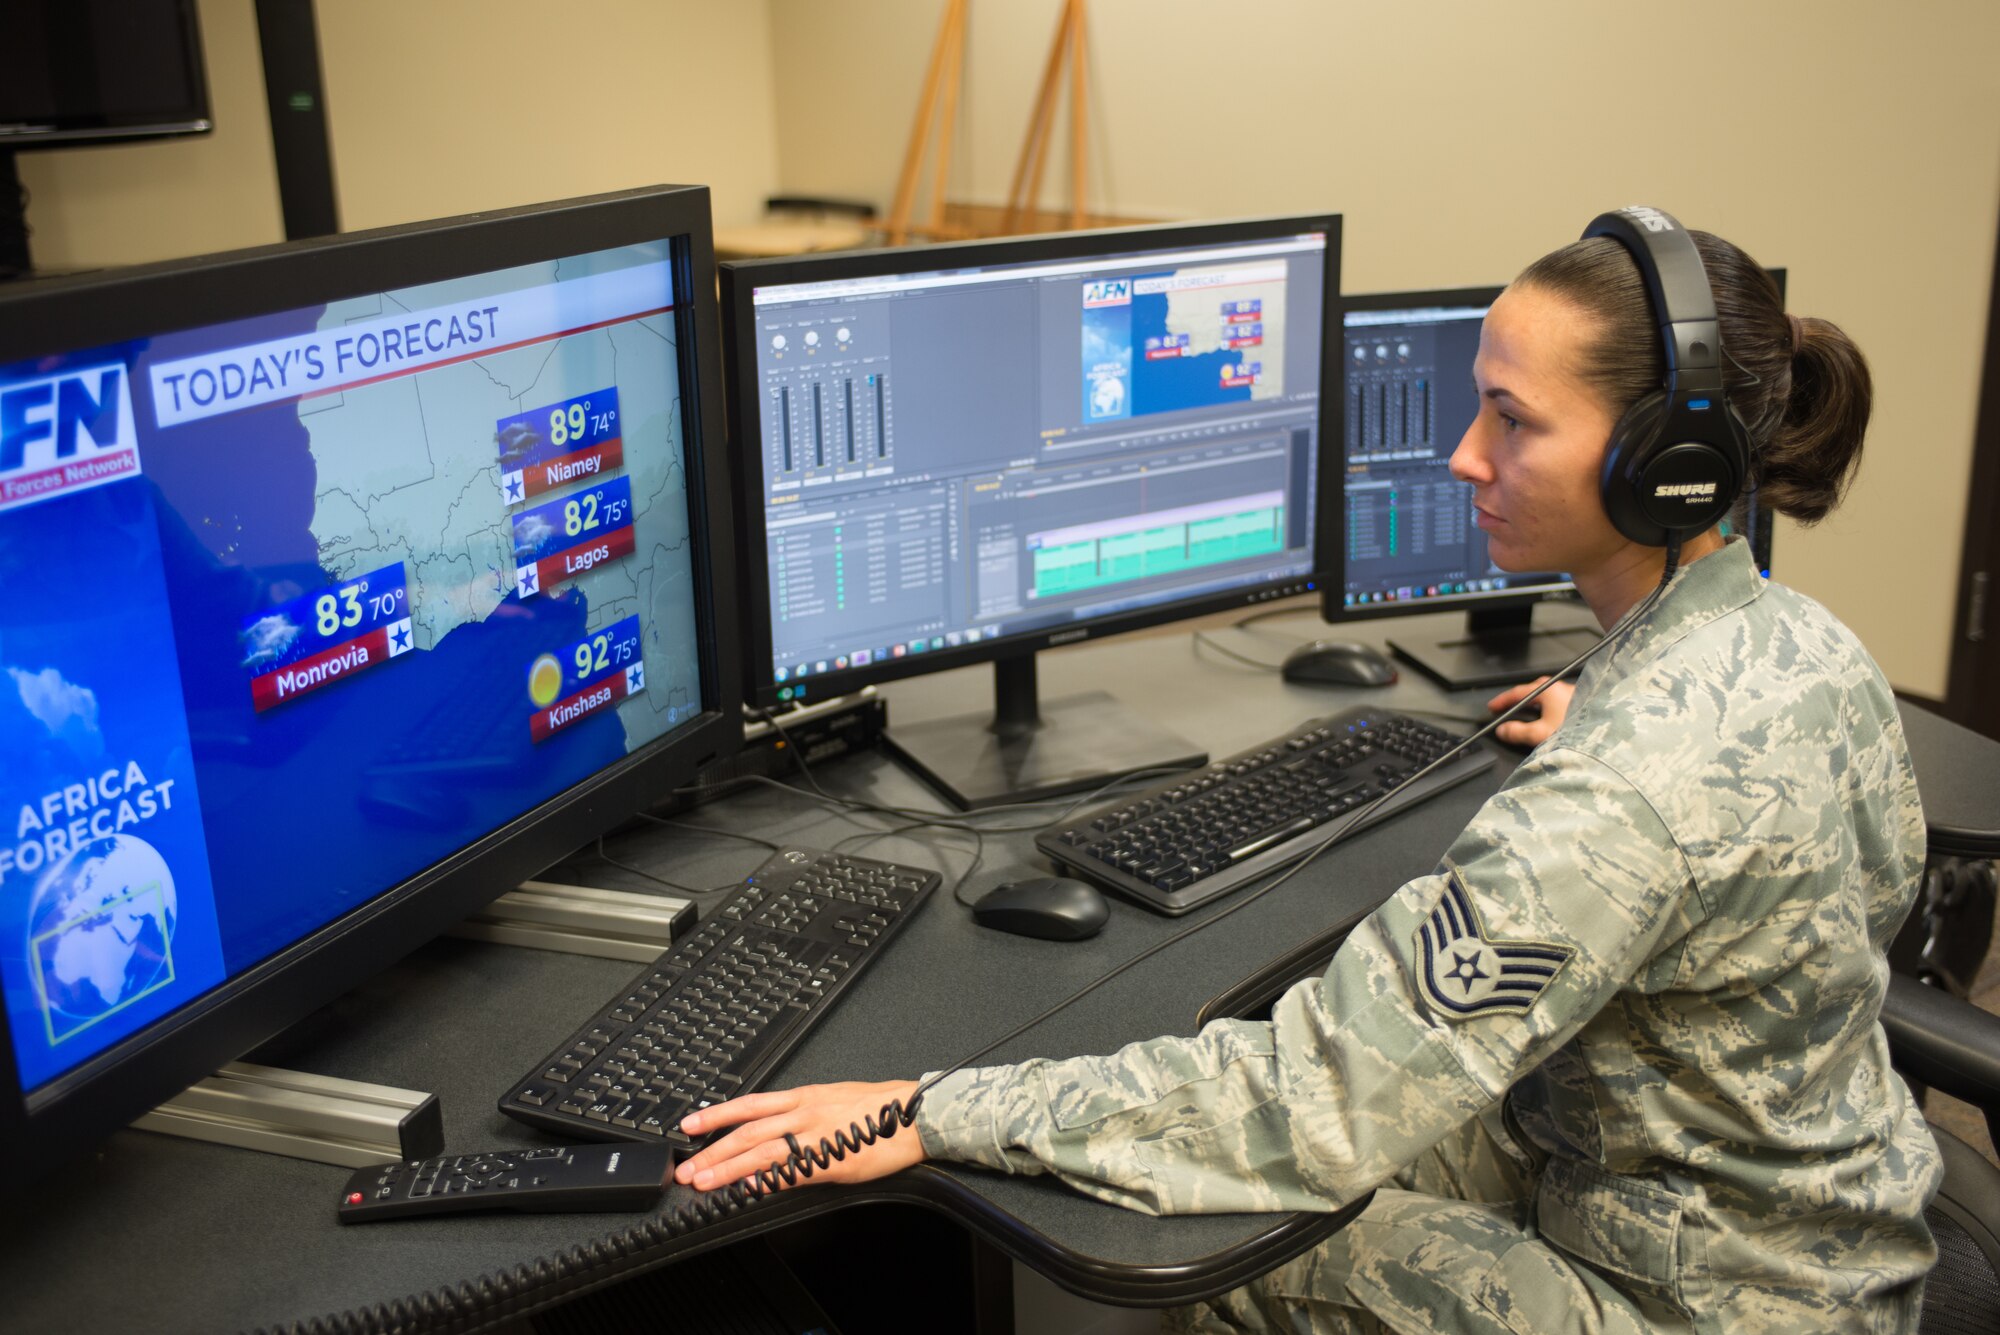 Staff Sgt. Nikitta Oakley, 2nd Weather Squadron weather craftsman, prepares an Africa weather forecast animation in the American Forces Network Weather Center (AFNWC) Aug. 9, 2018, at Offutt Air Force Base, Nebraska. The AFNWC provides daily forecasts for 85 locations around the world. (U.S. Air Force photo by Paul Shirk)